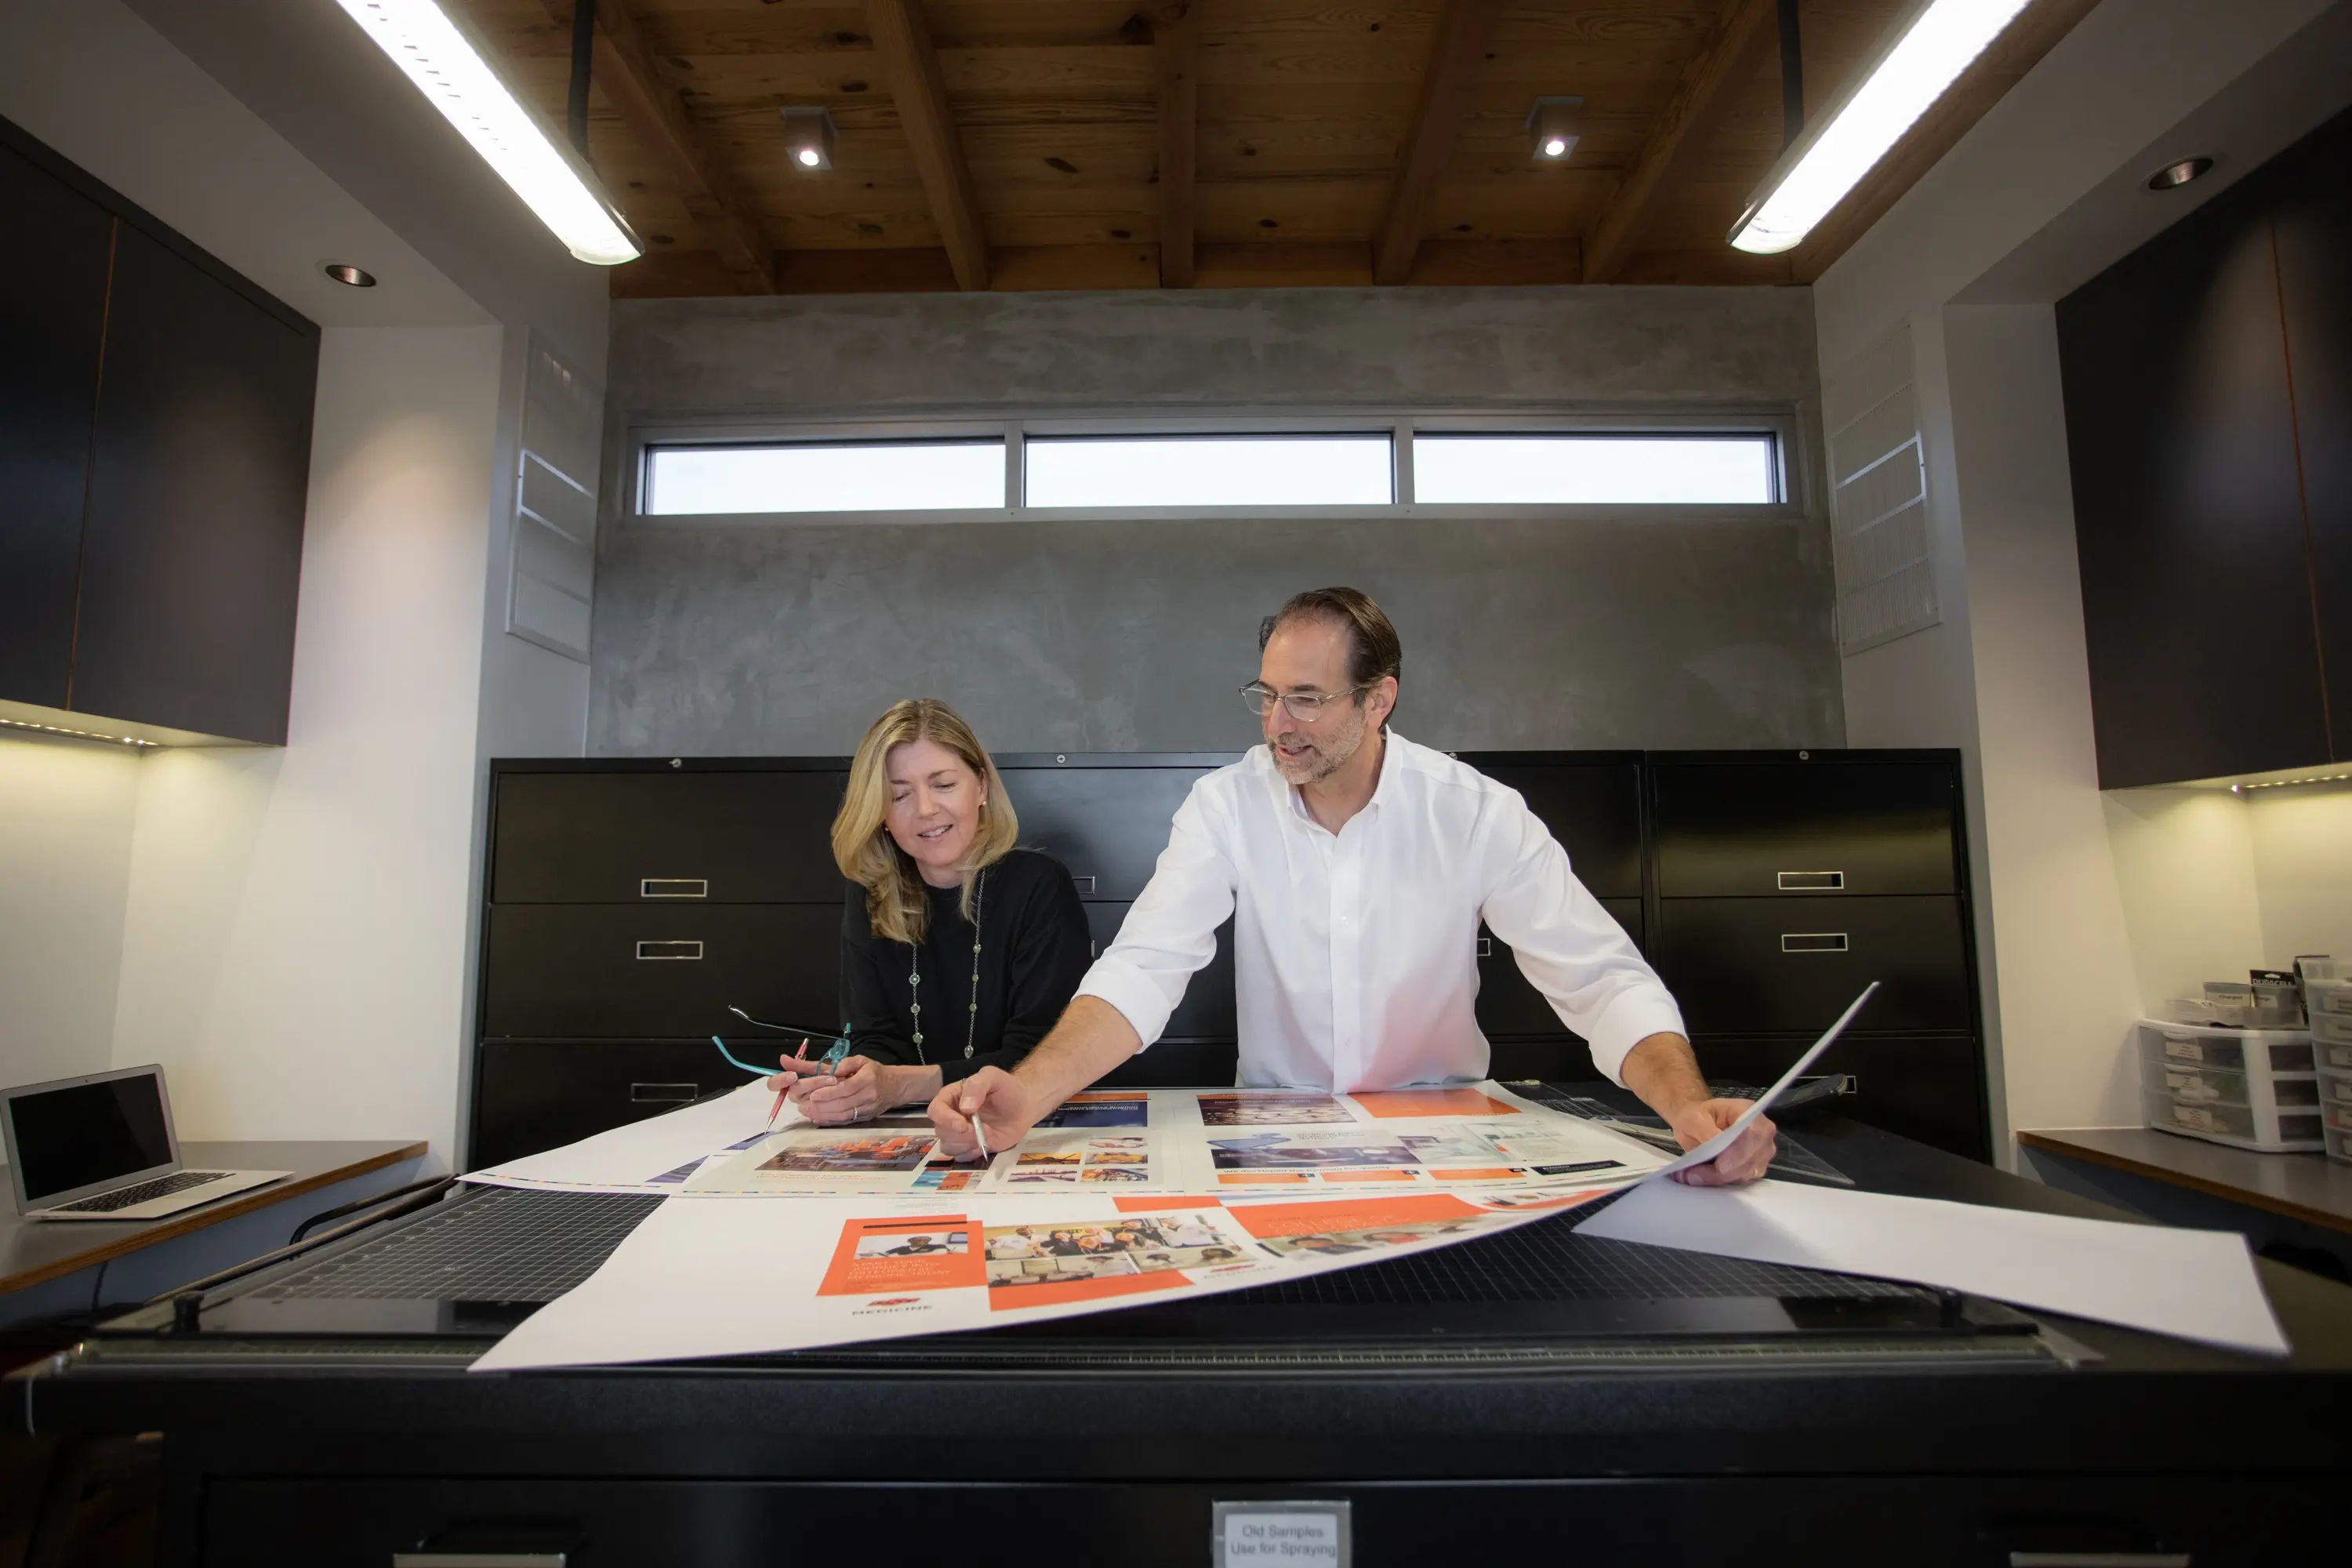 Station8 co-founders David Clark and Laura Crouch begin working together as a graphic design/writing team.